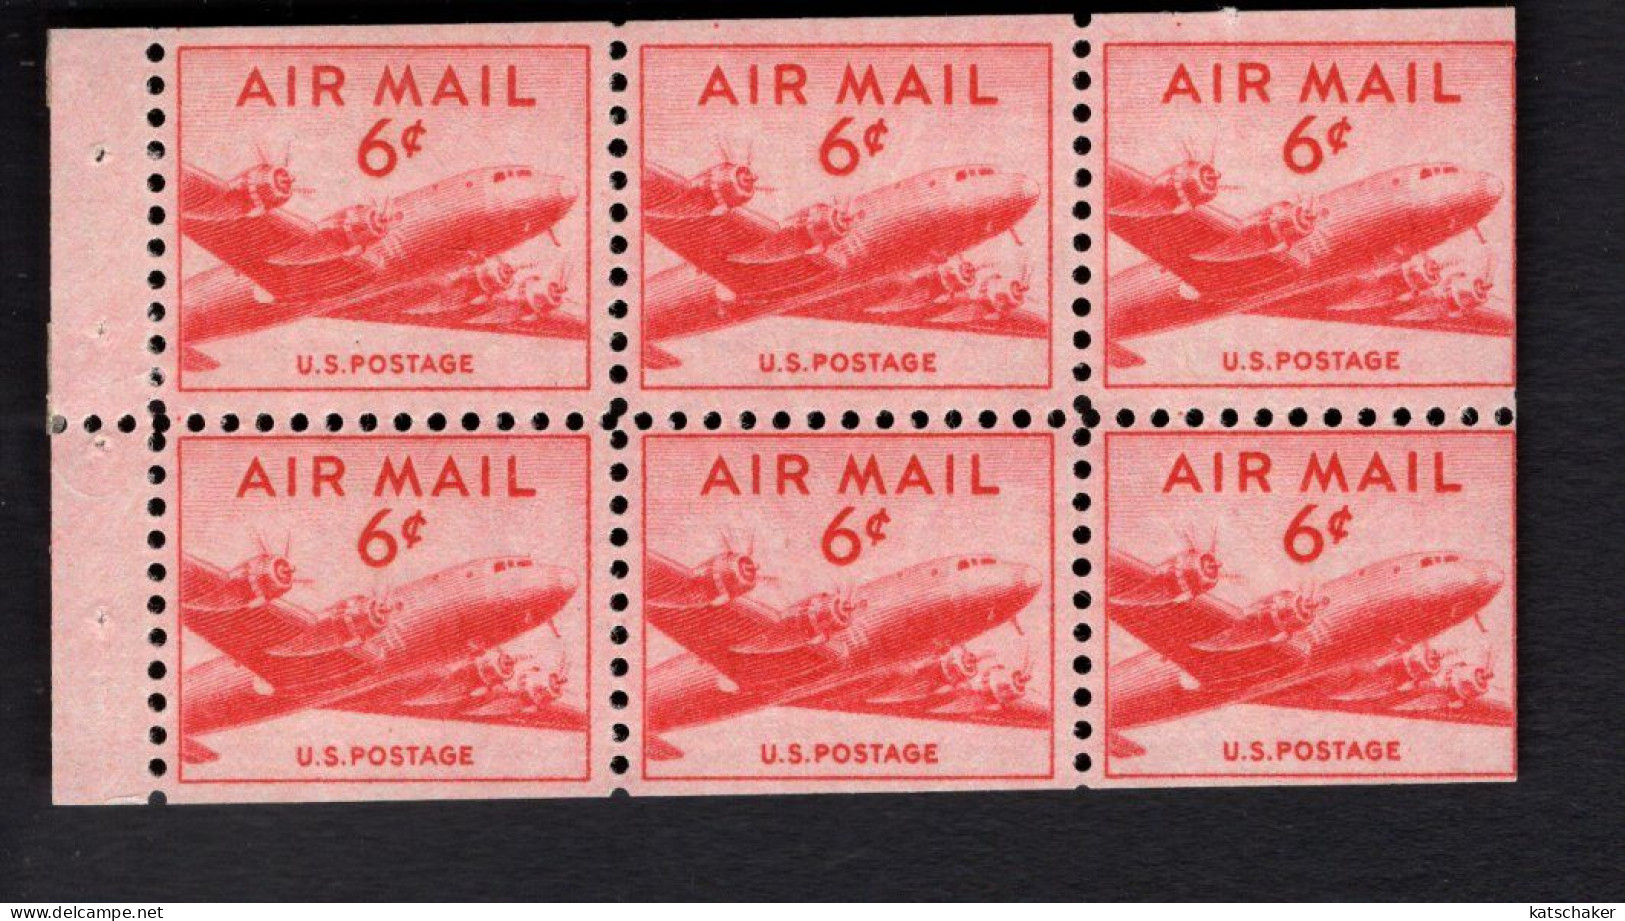 2021706665 1949 SCOTT C39A (XX) POSTFRIS MINT NEVER HINGED - Booklet Pane Of 6 -  DC-4 SKYMASTER - AIRPLANE - 2b. 1941-1960 Unused